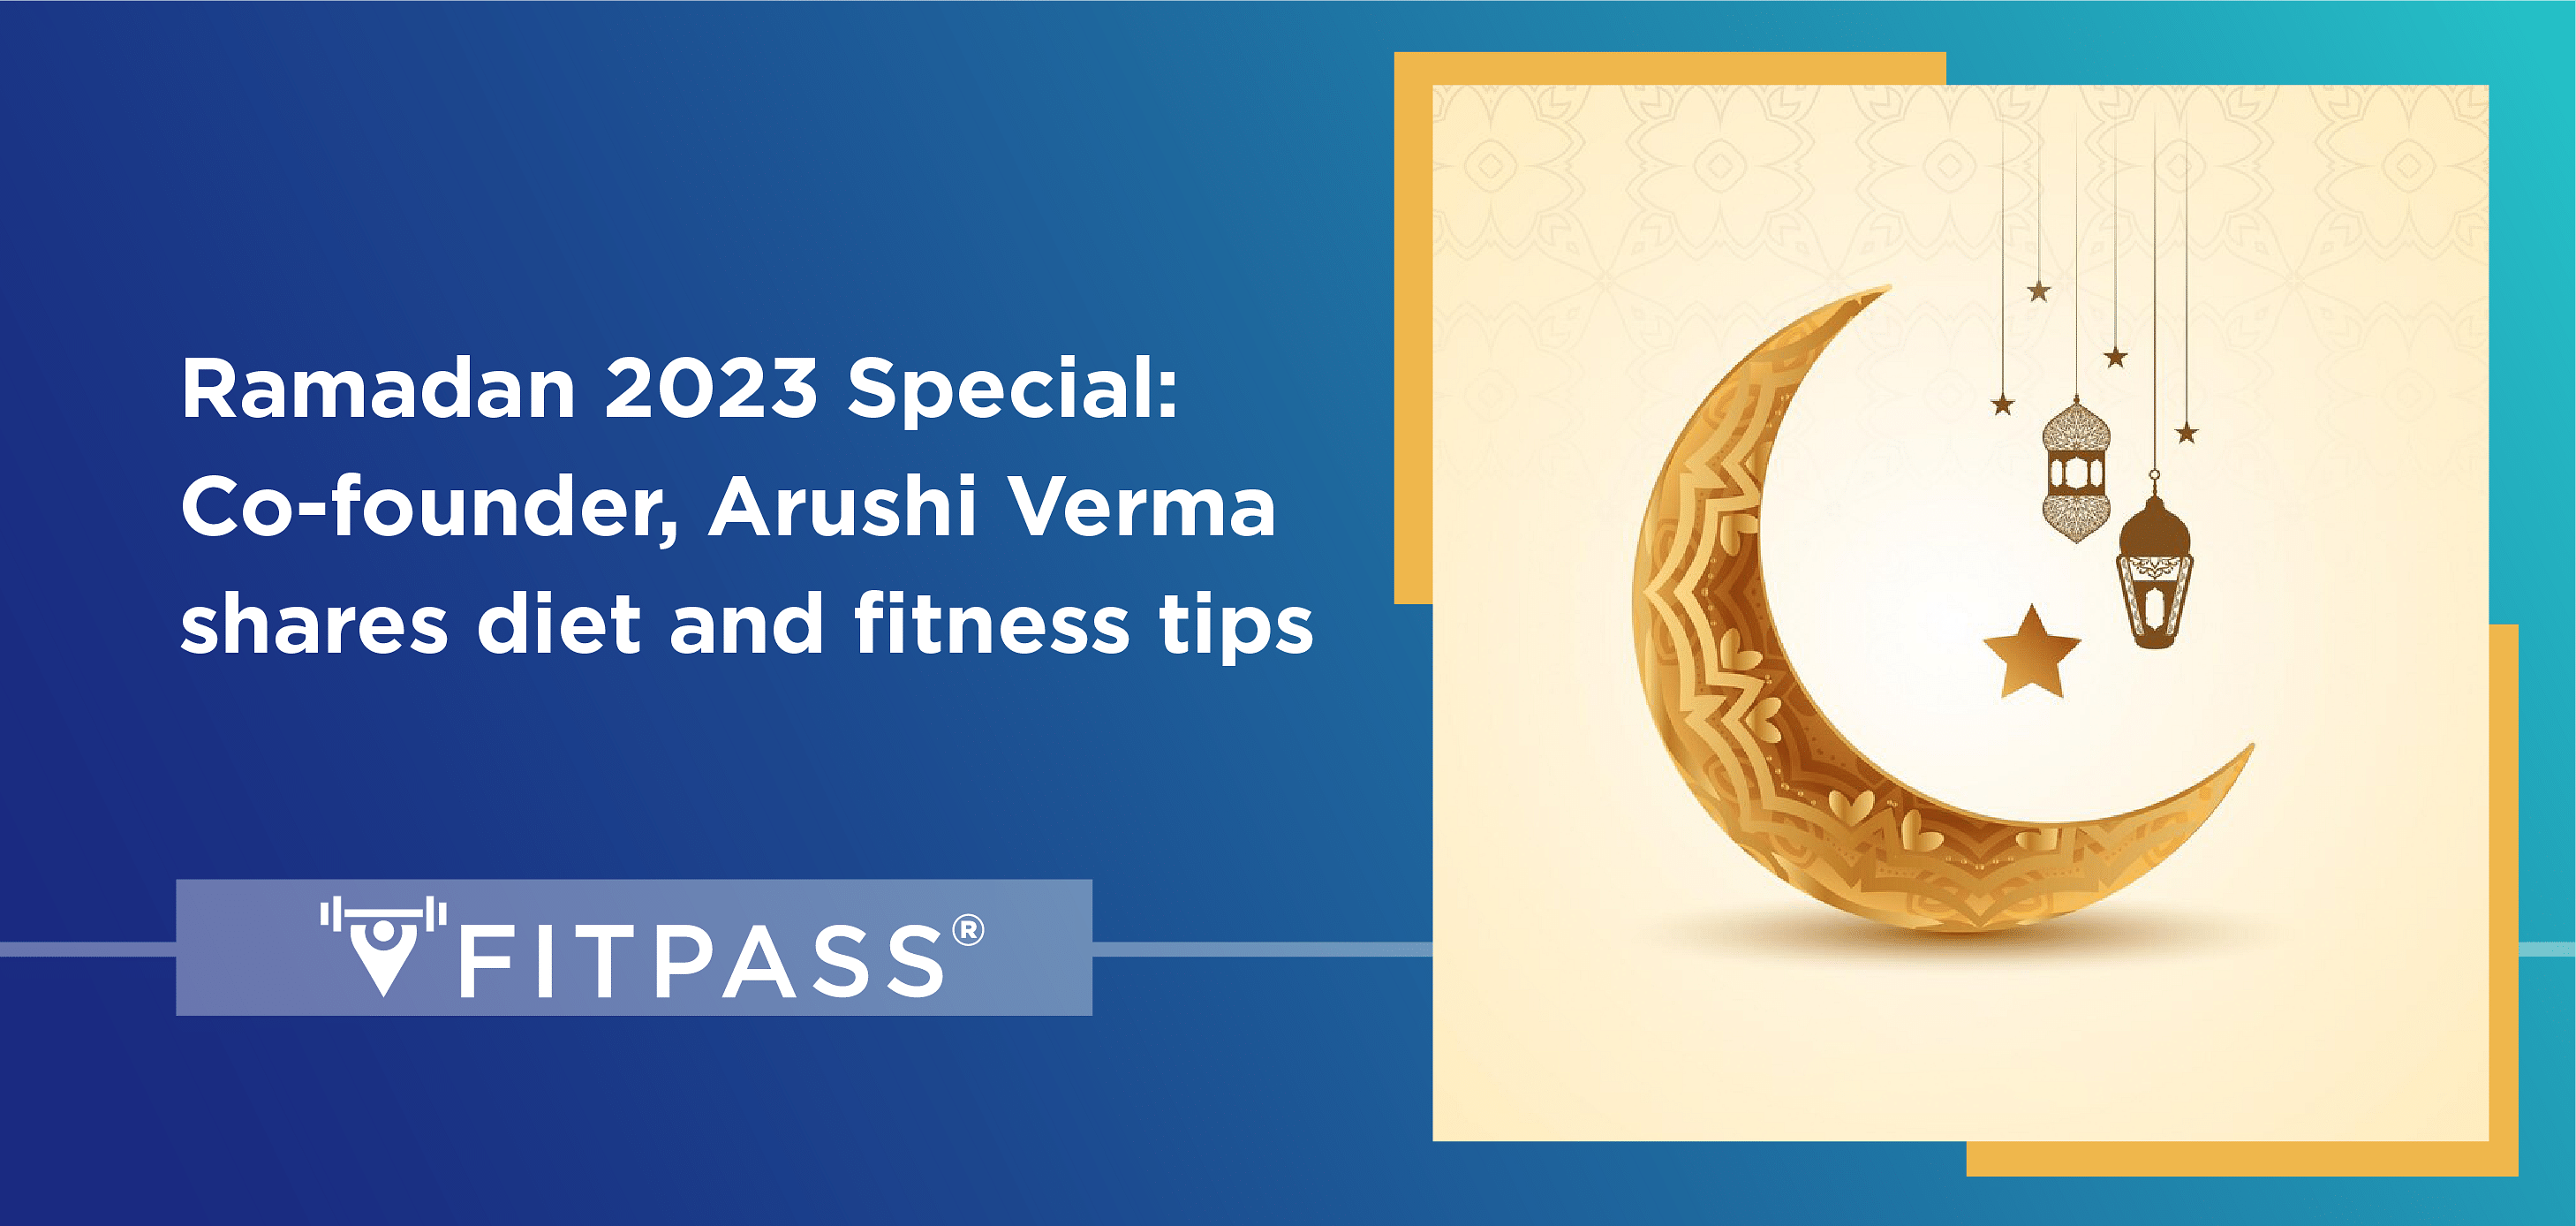 Ramadan 2023 Special: Co-founder, Arushi Verma shares diet and fitness tips